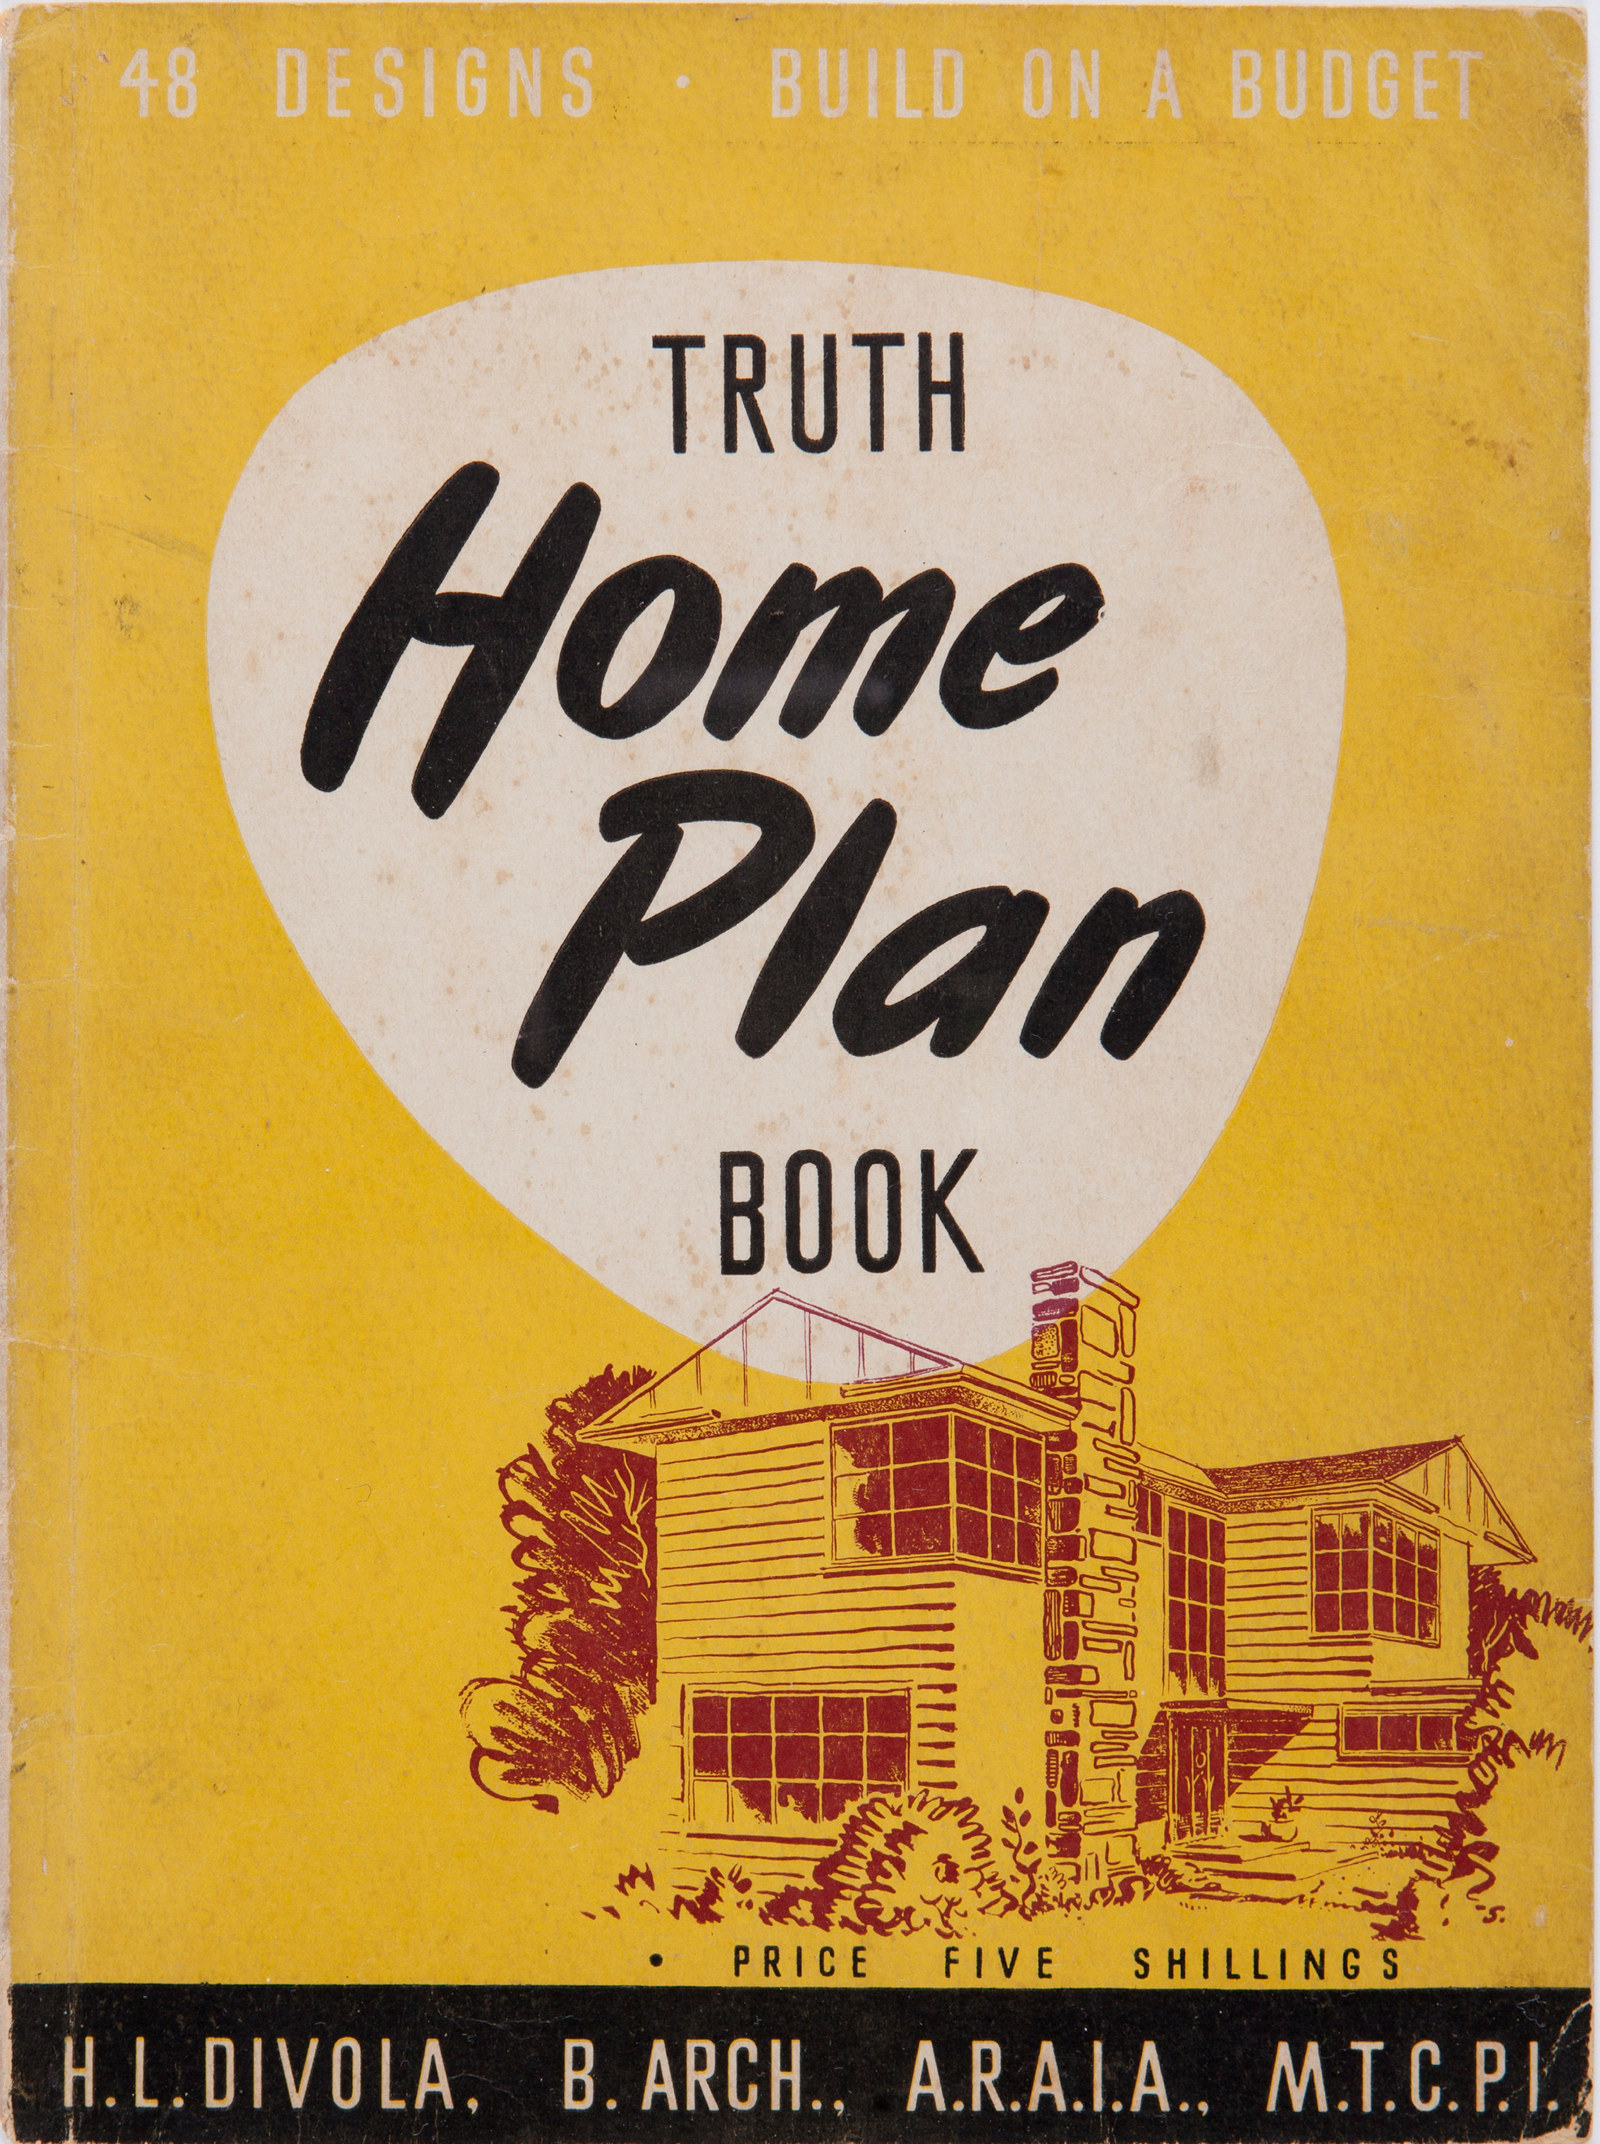 Cover of book, yellow background with drawing of house in brown and black.